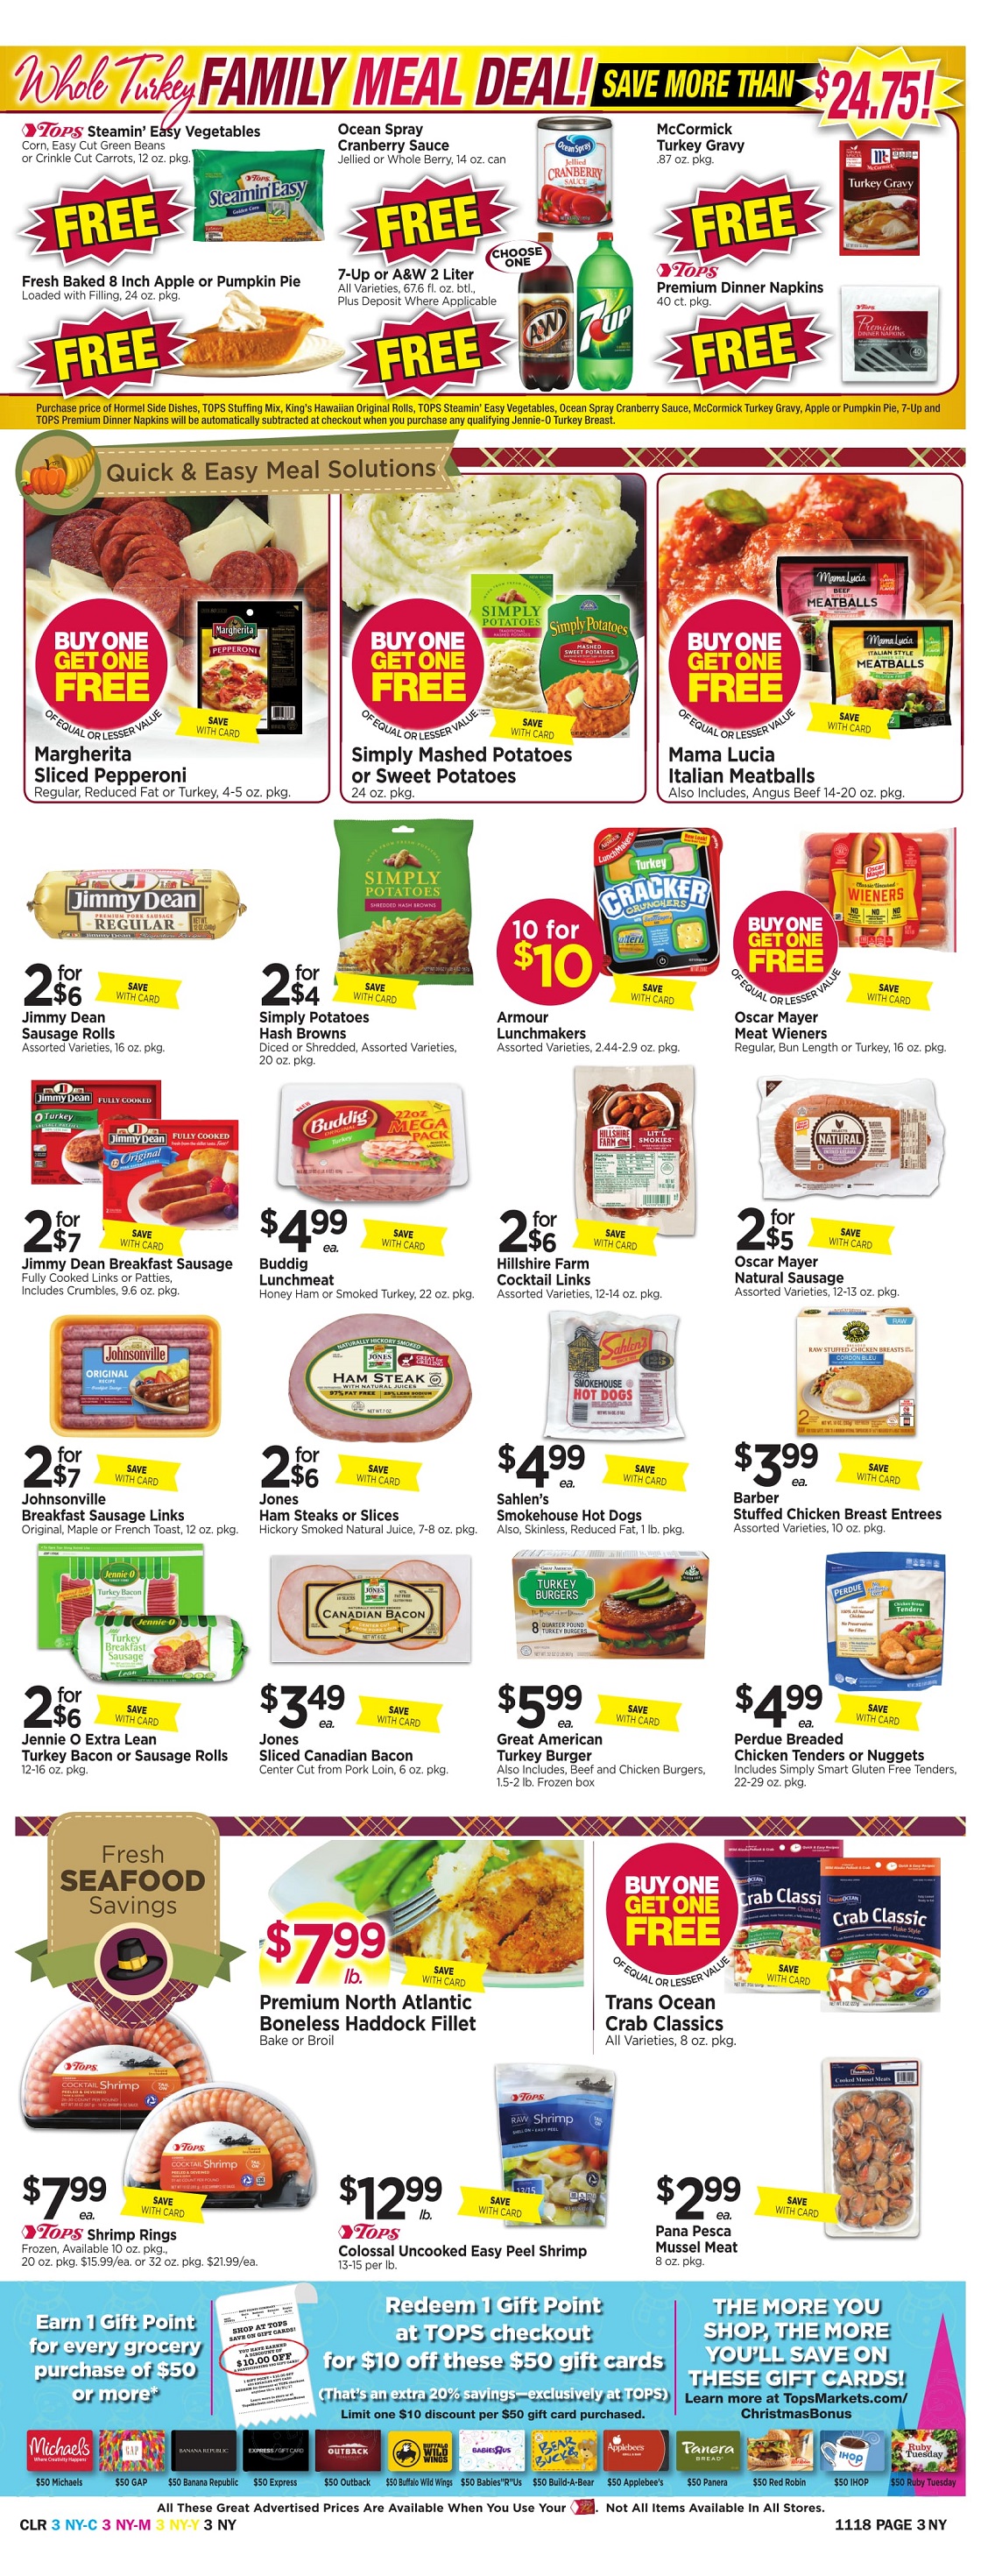 Tops Markets Ad Scan Week Pf 11 12 Page 3